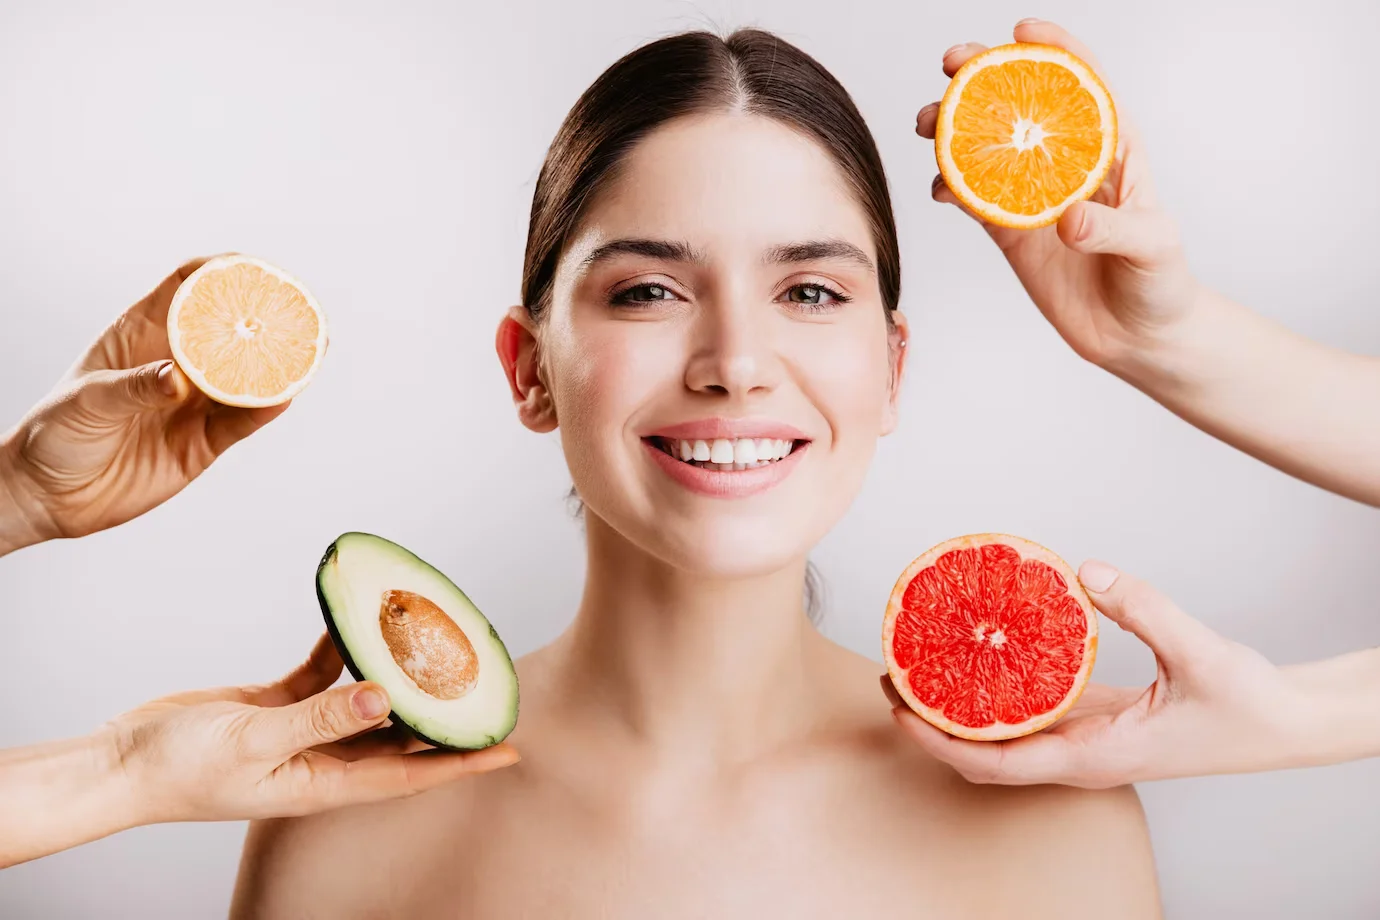 5 Key Benefits of Nutrients for Skin Health